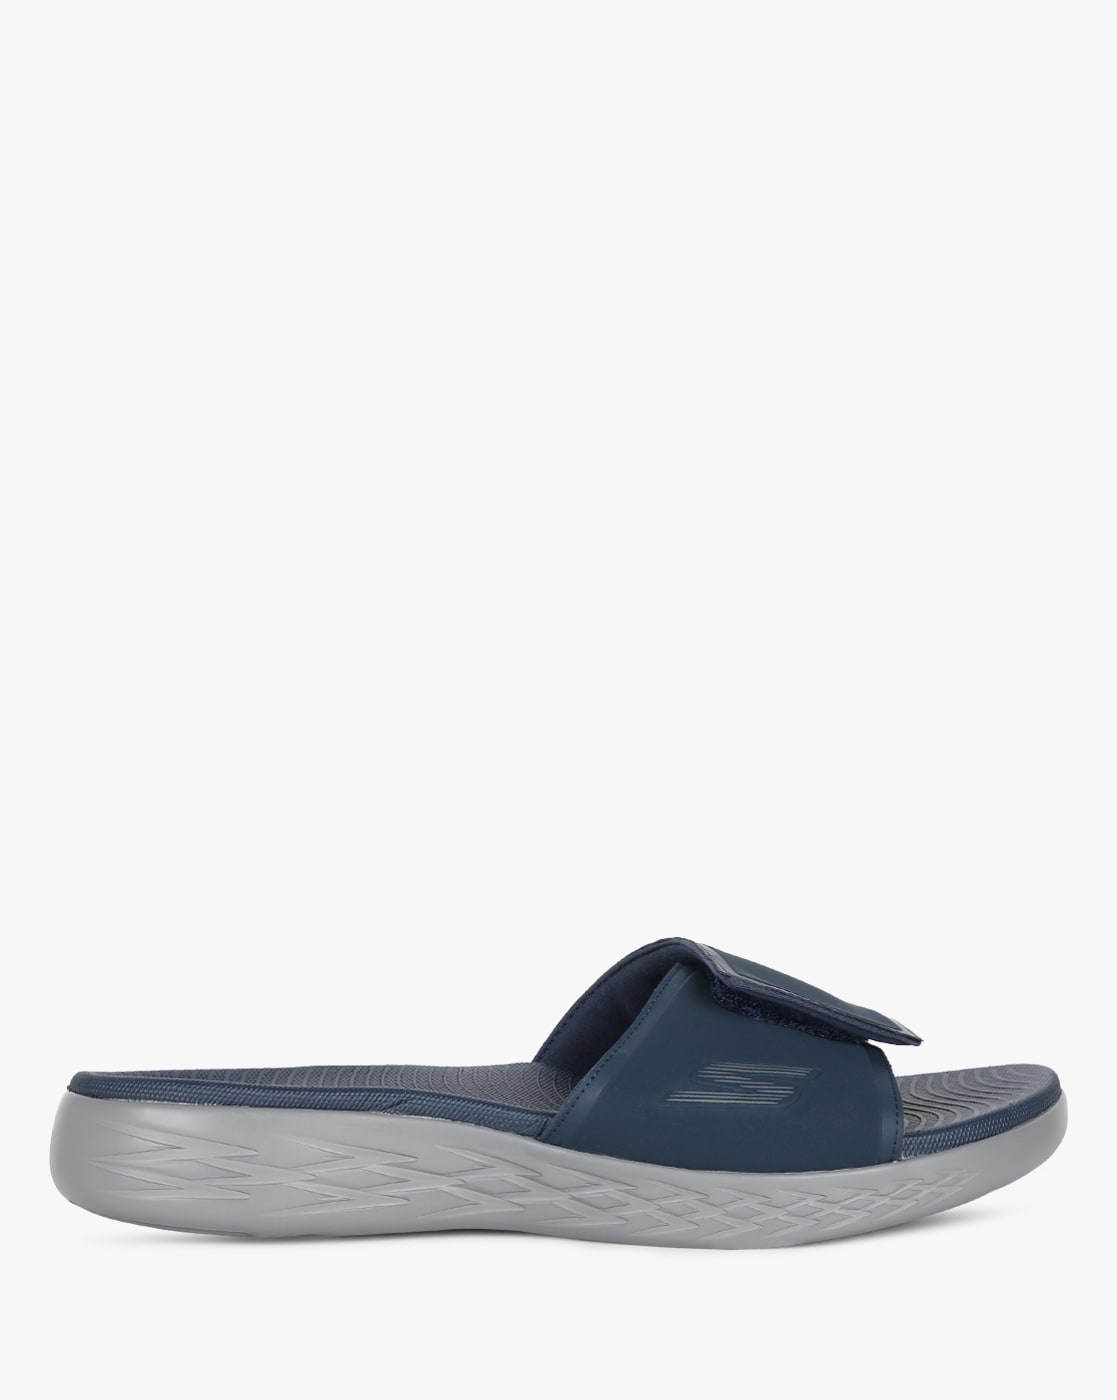 skechers chappals for mens